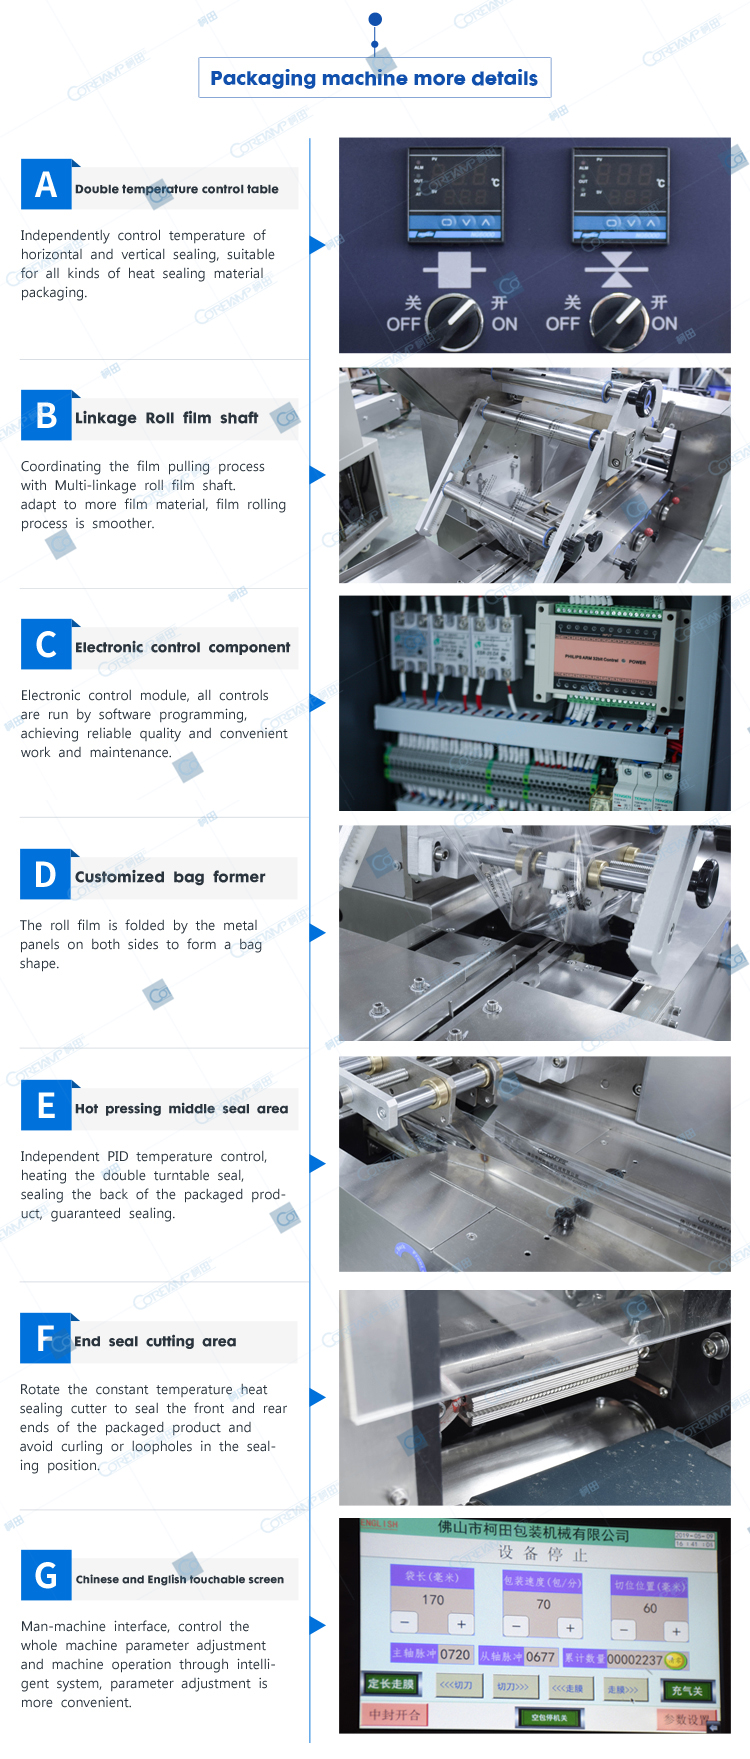 Soap Automatic Packing Machine With Auto Feeder